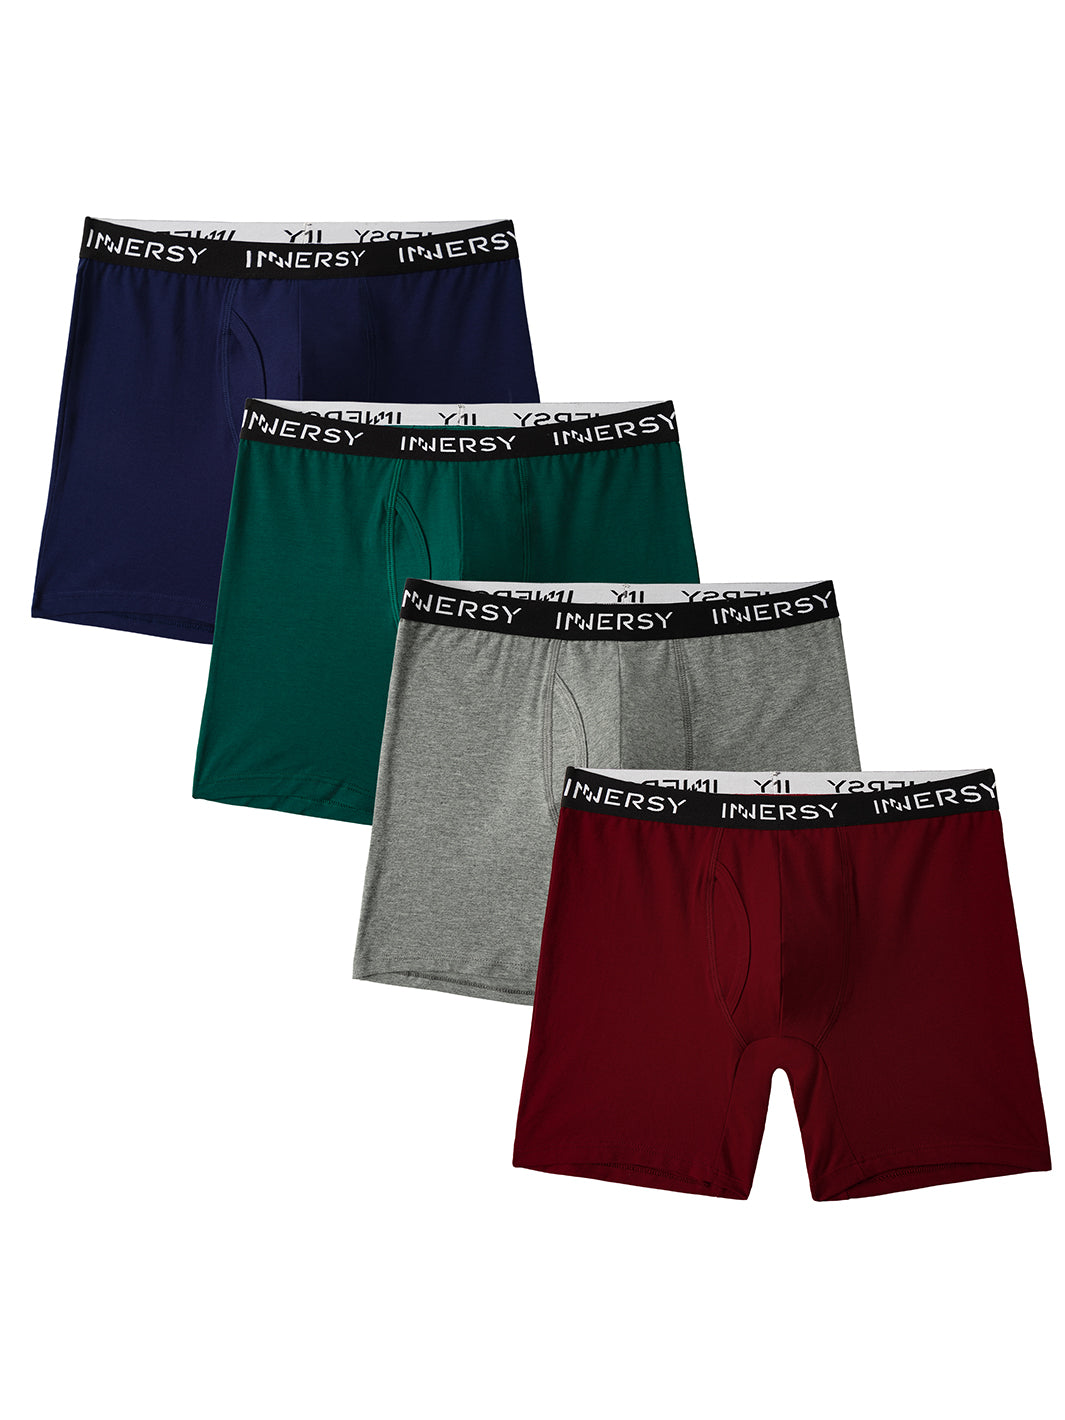 NEXT A-front Colour Spot Pattern Luxury Men Boxers Pack Of 4 in Utako -  Clothing, Bsdirect Stores